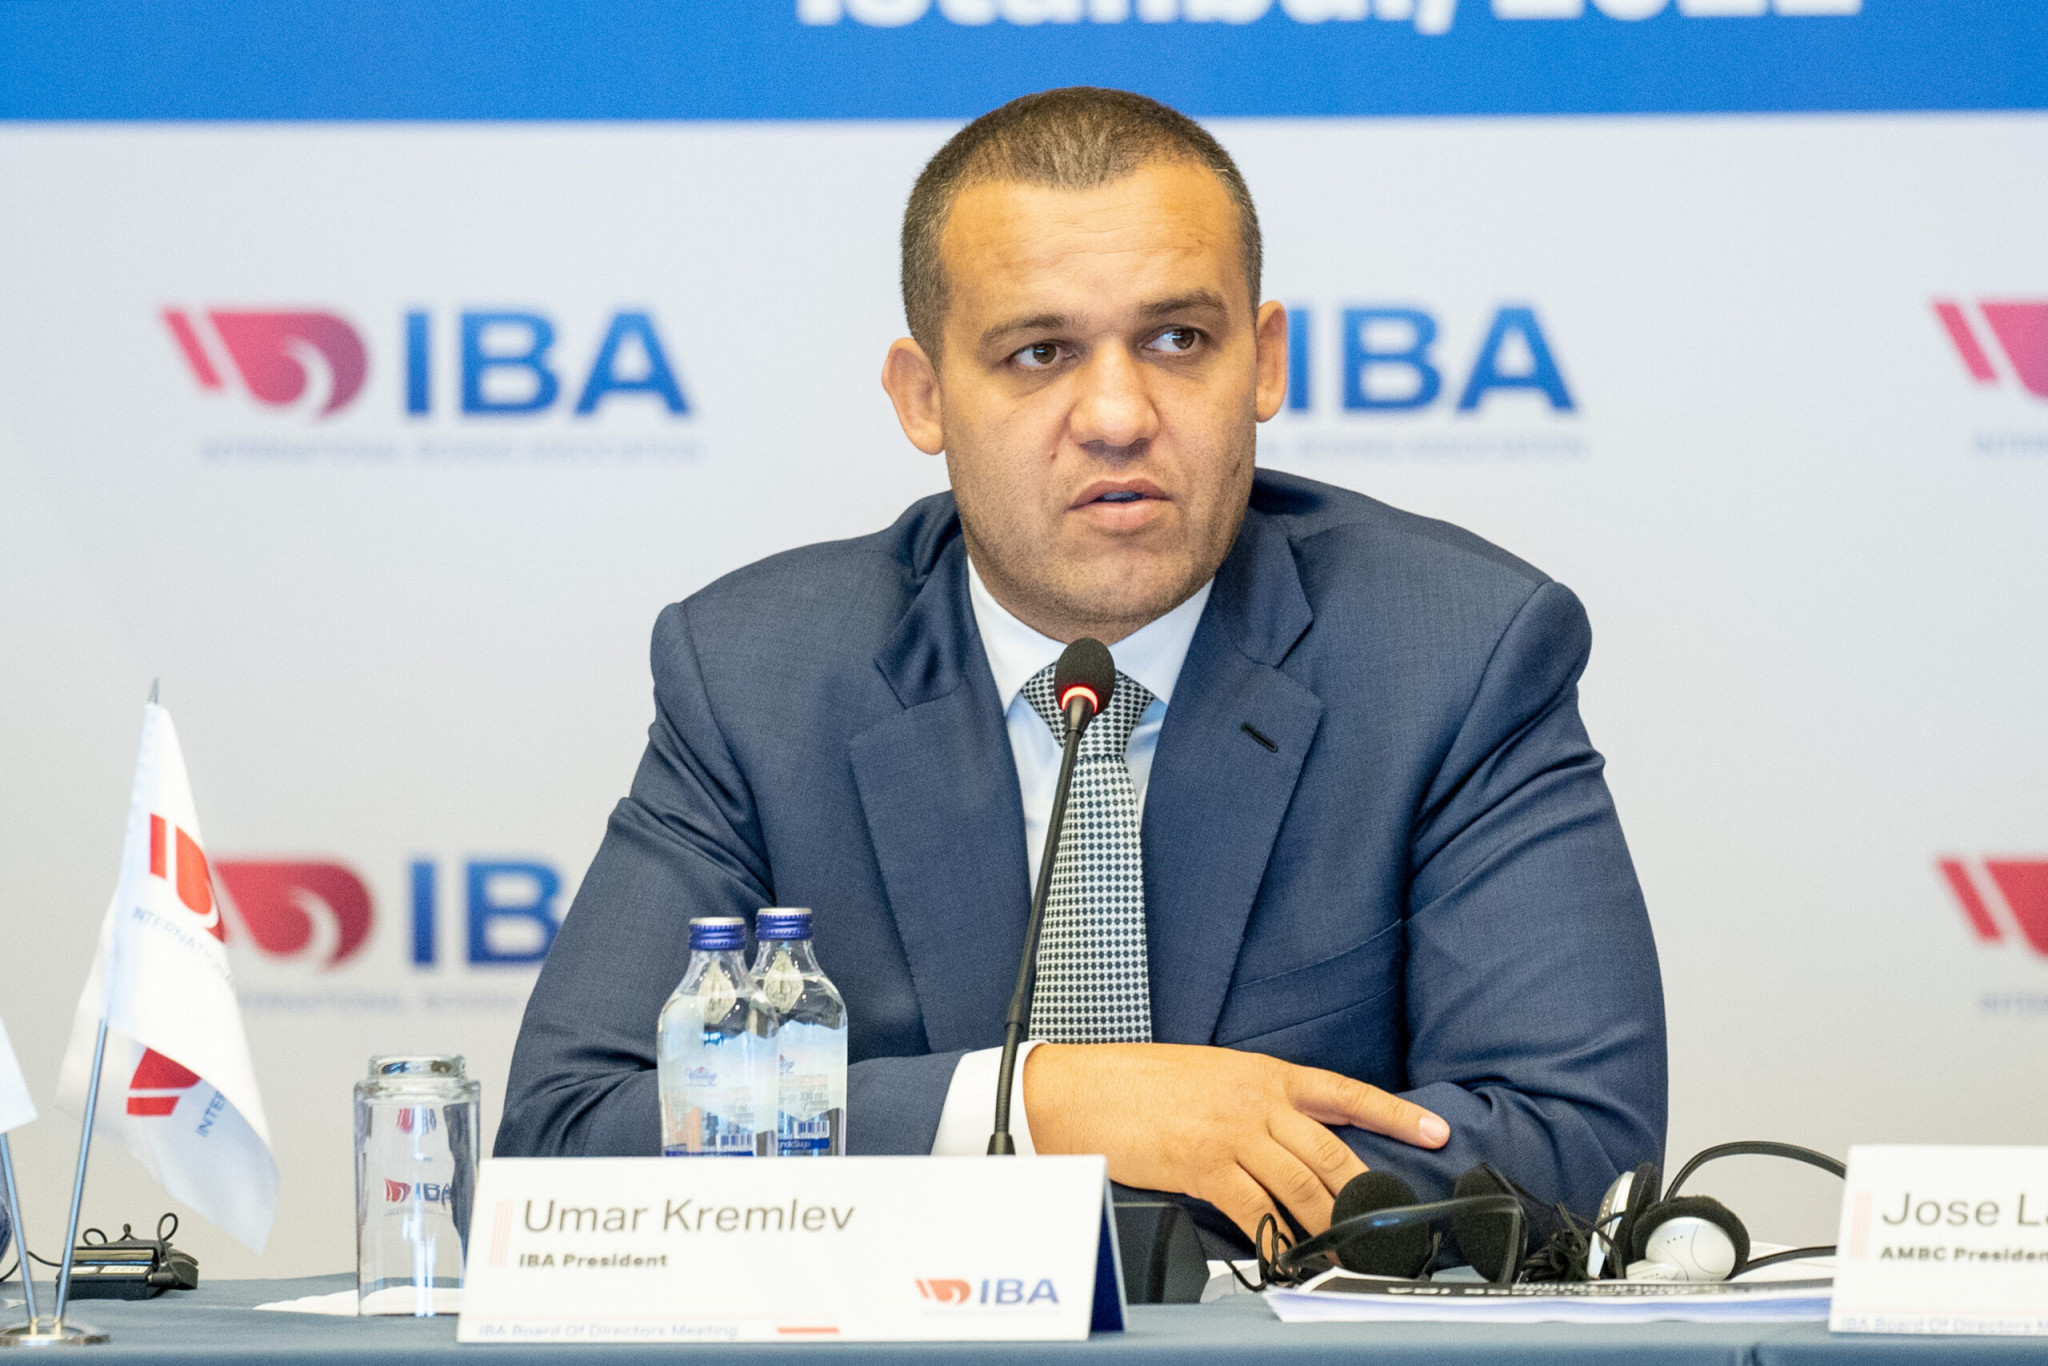 The BIIU had cleared IBA President Umar Kremlev of all charges, after complaints that he had broken campaign rules prior to tomorrow's Extraordinary Congress in Yerevan ©IBA